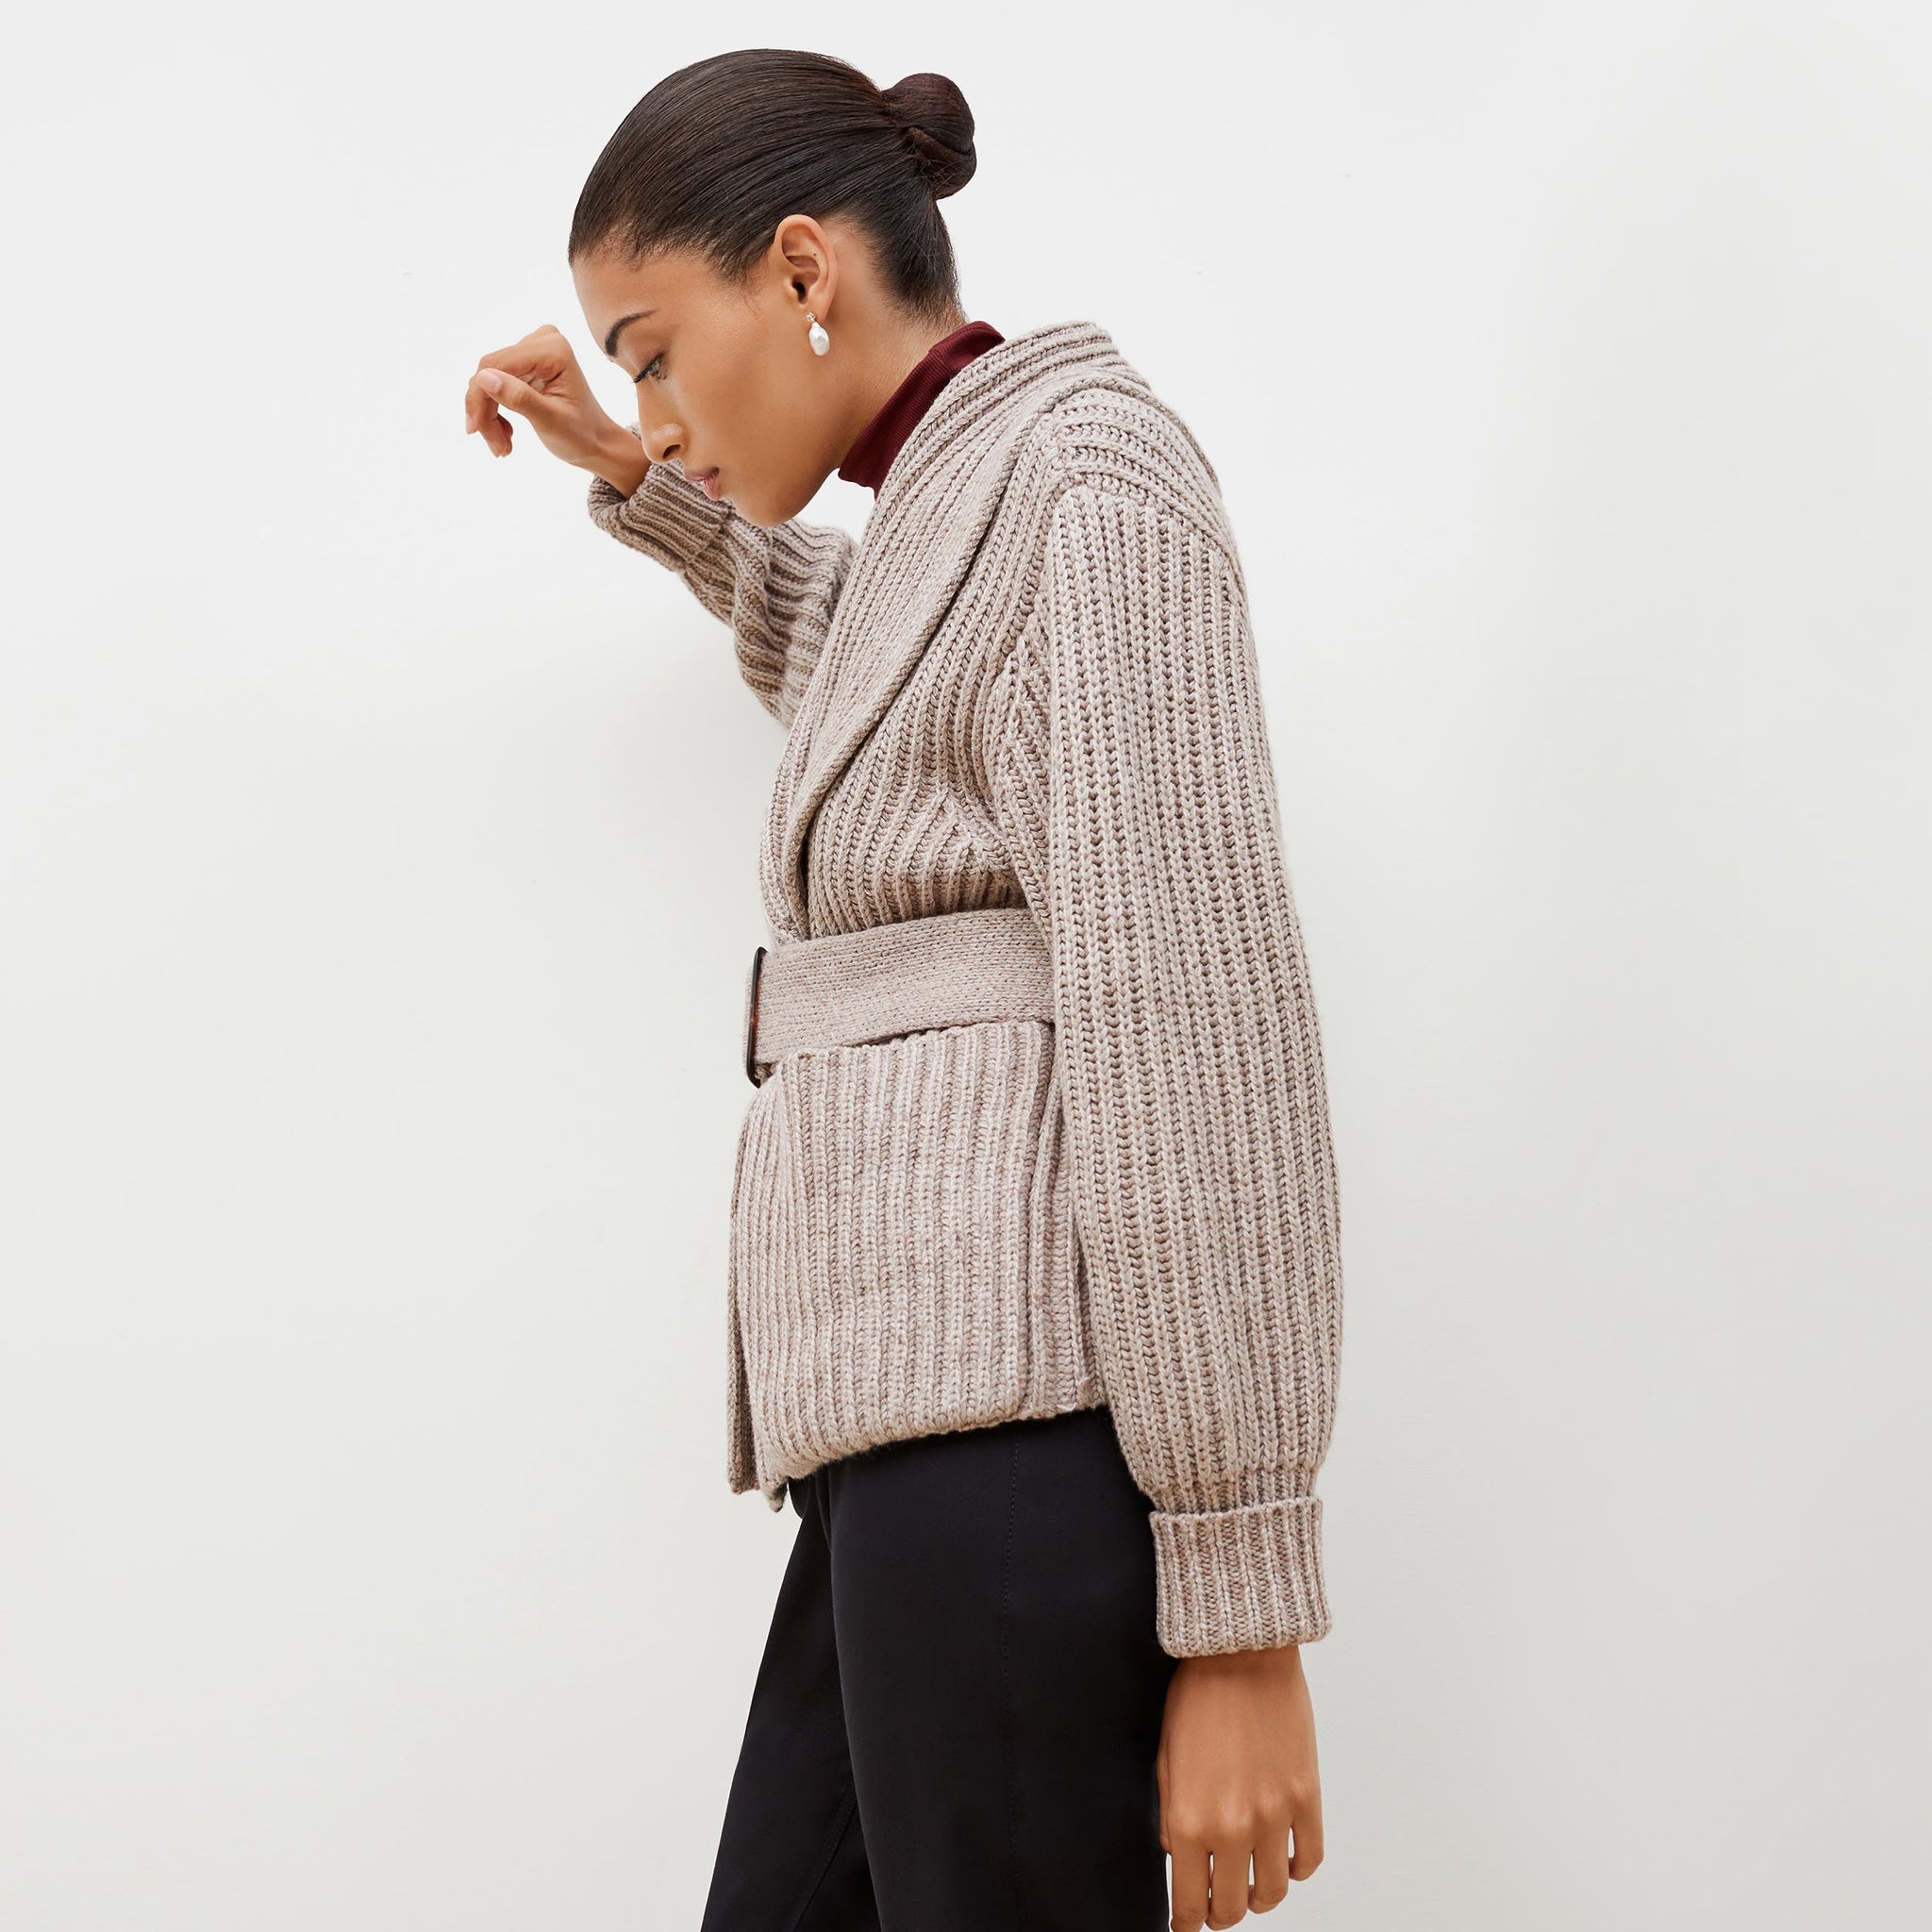 Side image of a woman standing wearing the Snyder Jacket—Lush Merino in Barley